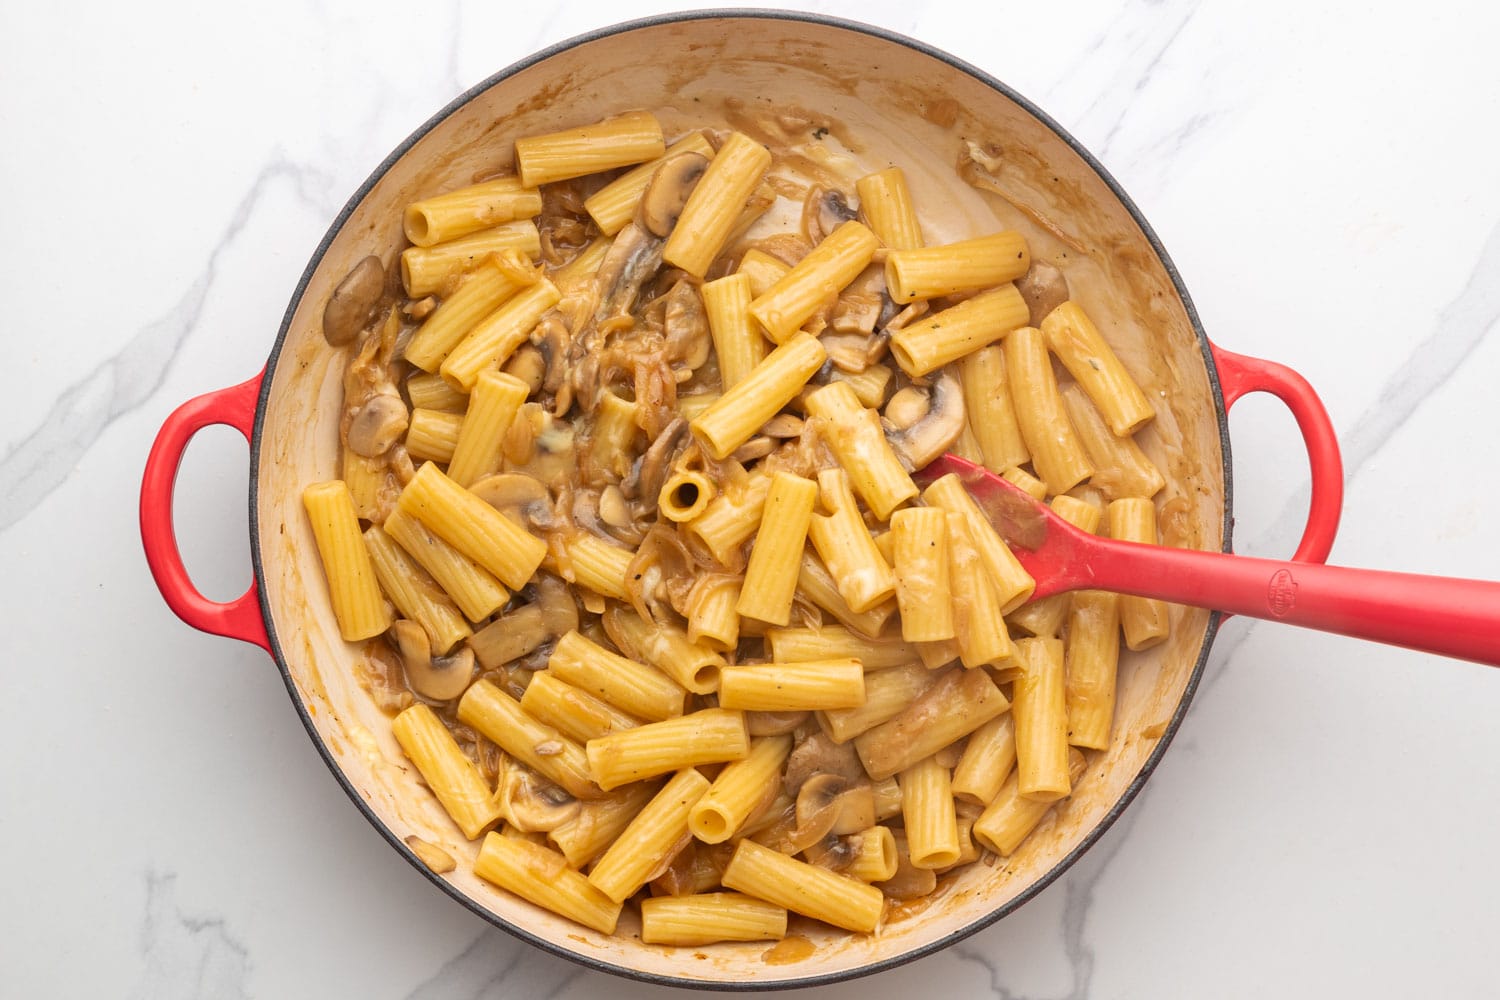 Cheese melted into rigatoni with onions and mushrooms.